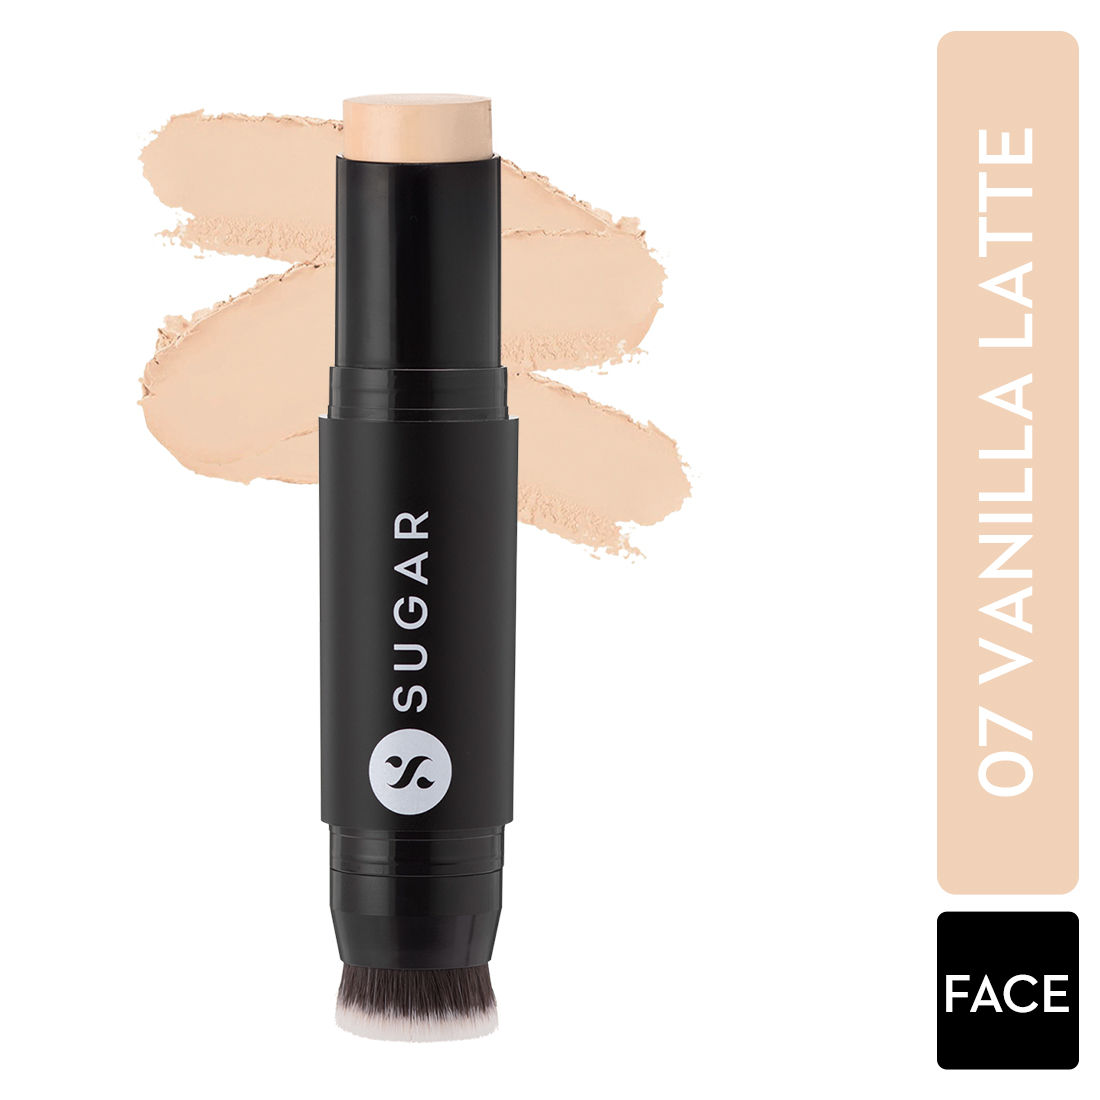 Buy SUGAR Cosmetics - Ace Of Face - Foundation Stick - 07 Vanilla Latte (Fair Foundation with Golden Undertone) - Waterproof, Full Coverage Foundation for Women with Inbuilt Brush - Purplle